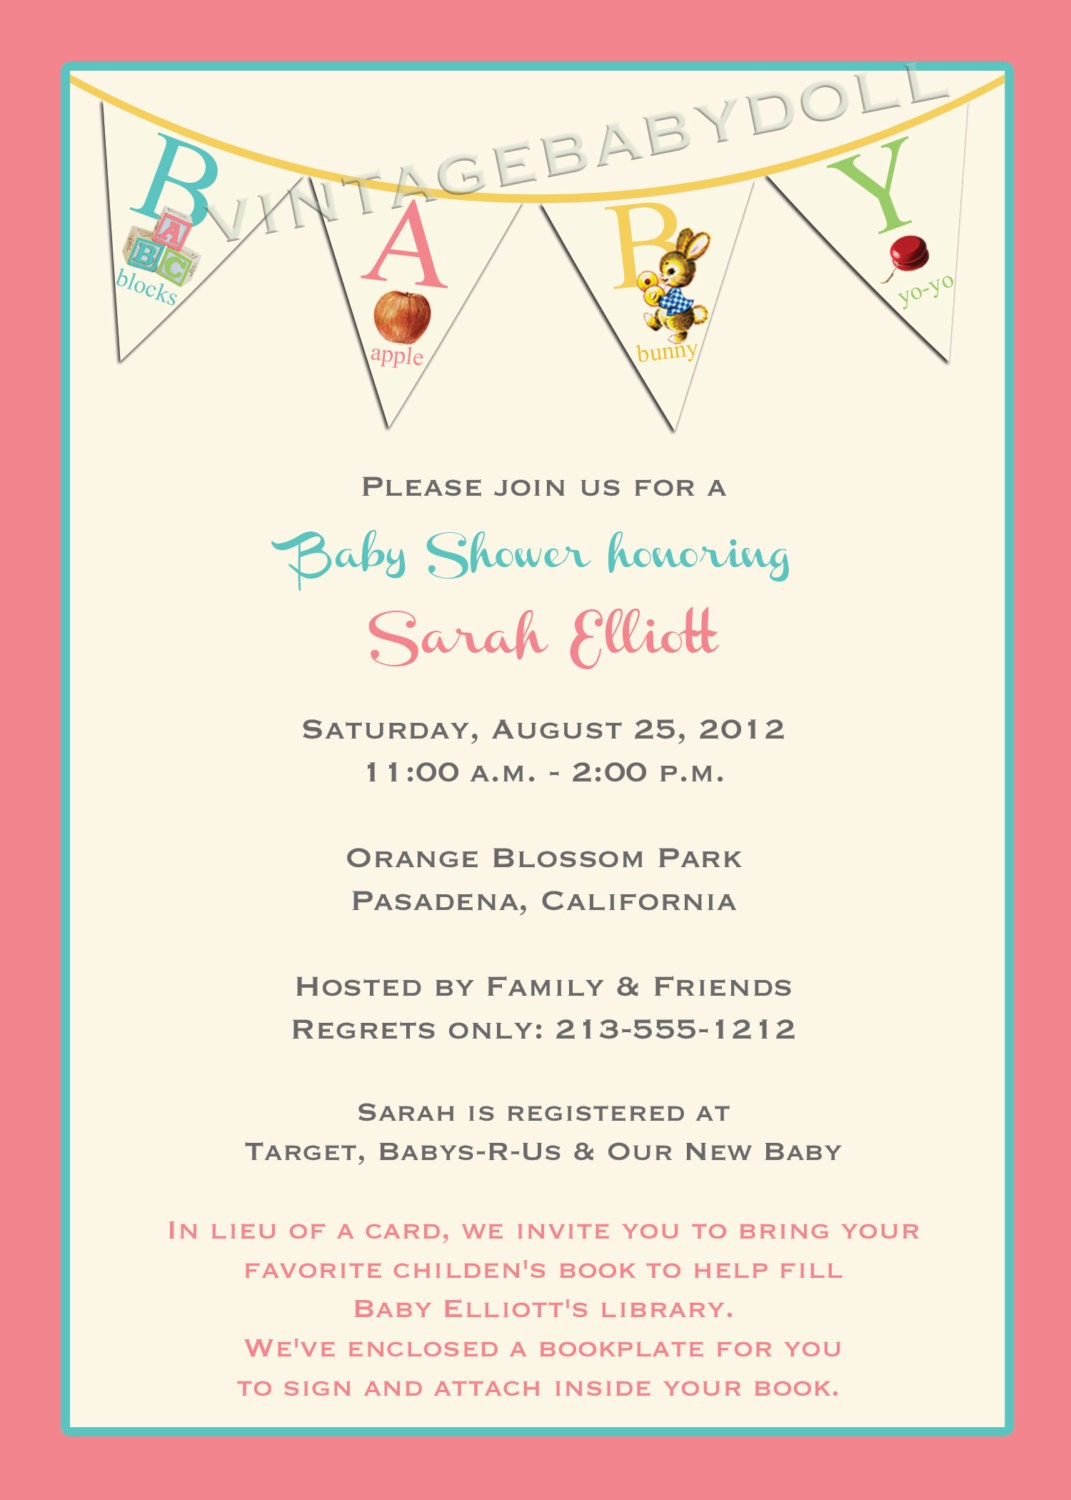 Baby Shower Invitations Wording Bring A Book